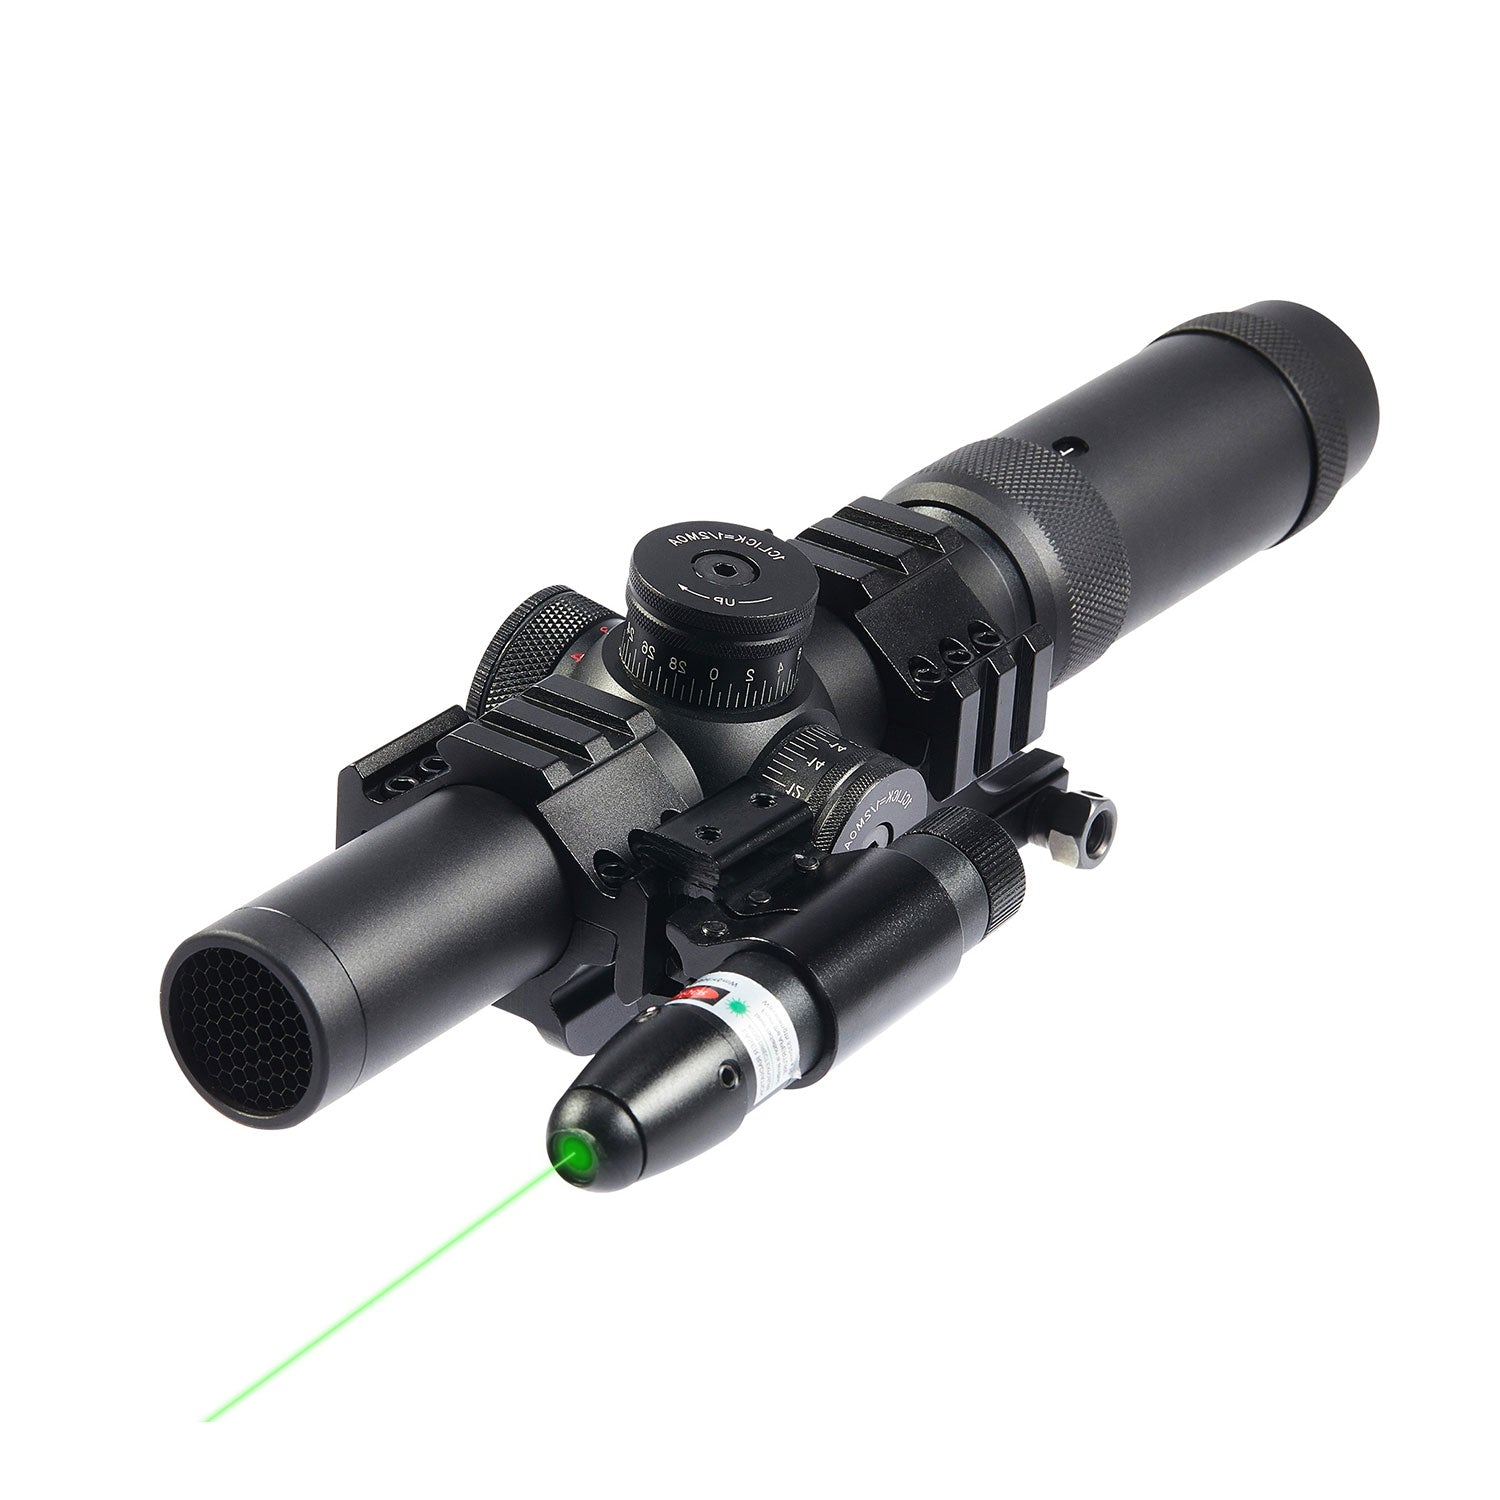 1-5x24 SFP Rifle Scope Combo with Green Laser Sight, Fits 20mm Picatinny/Weaver Rail